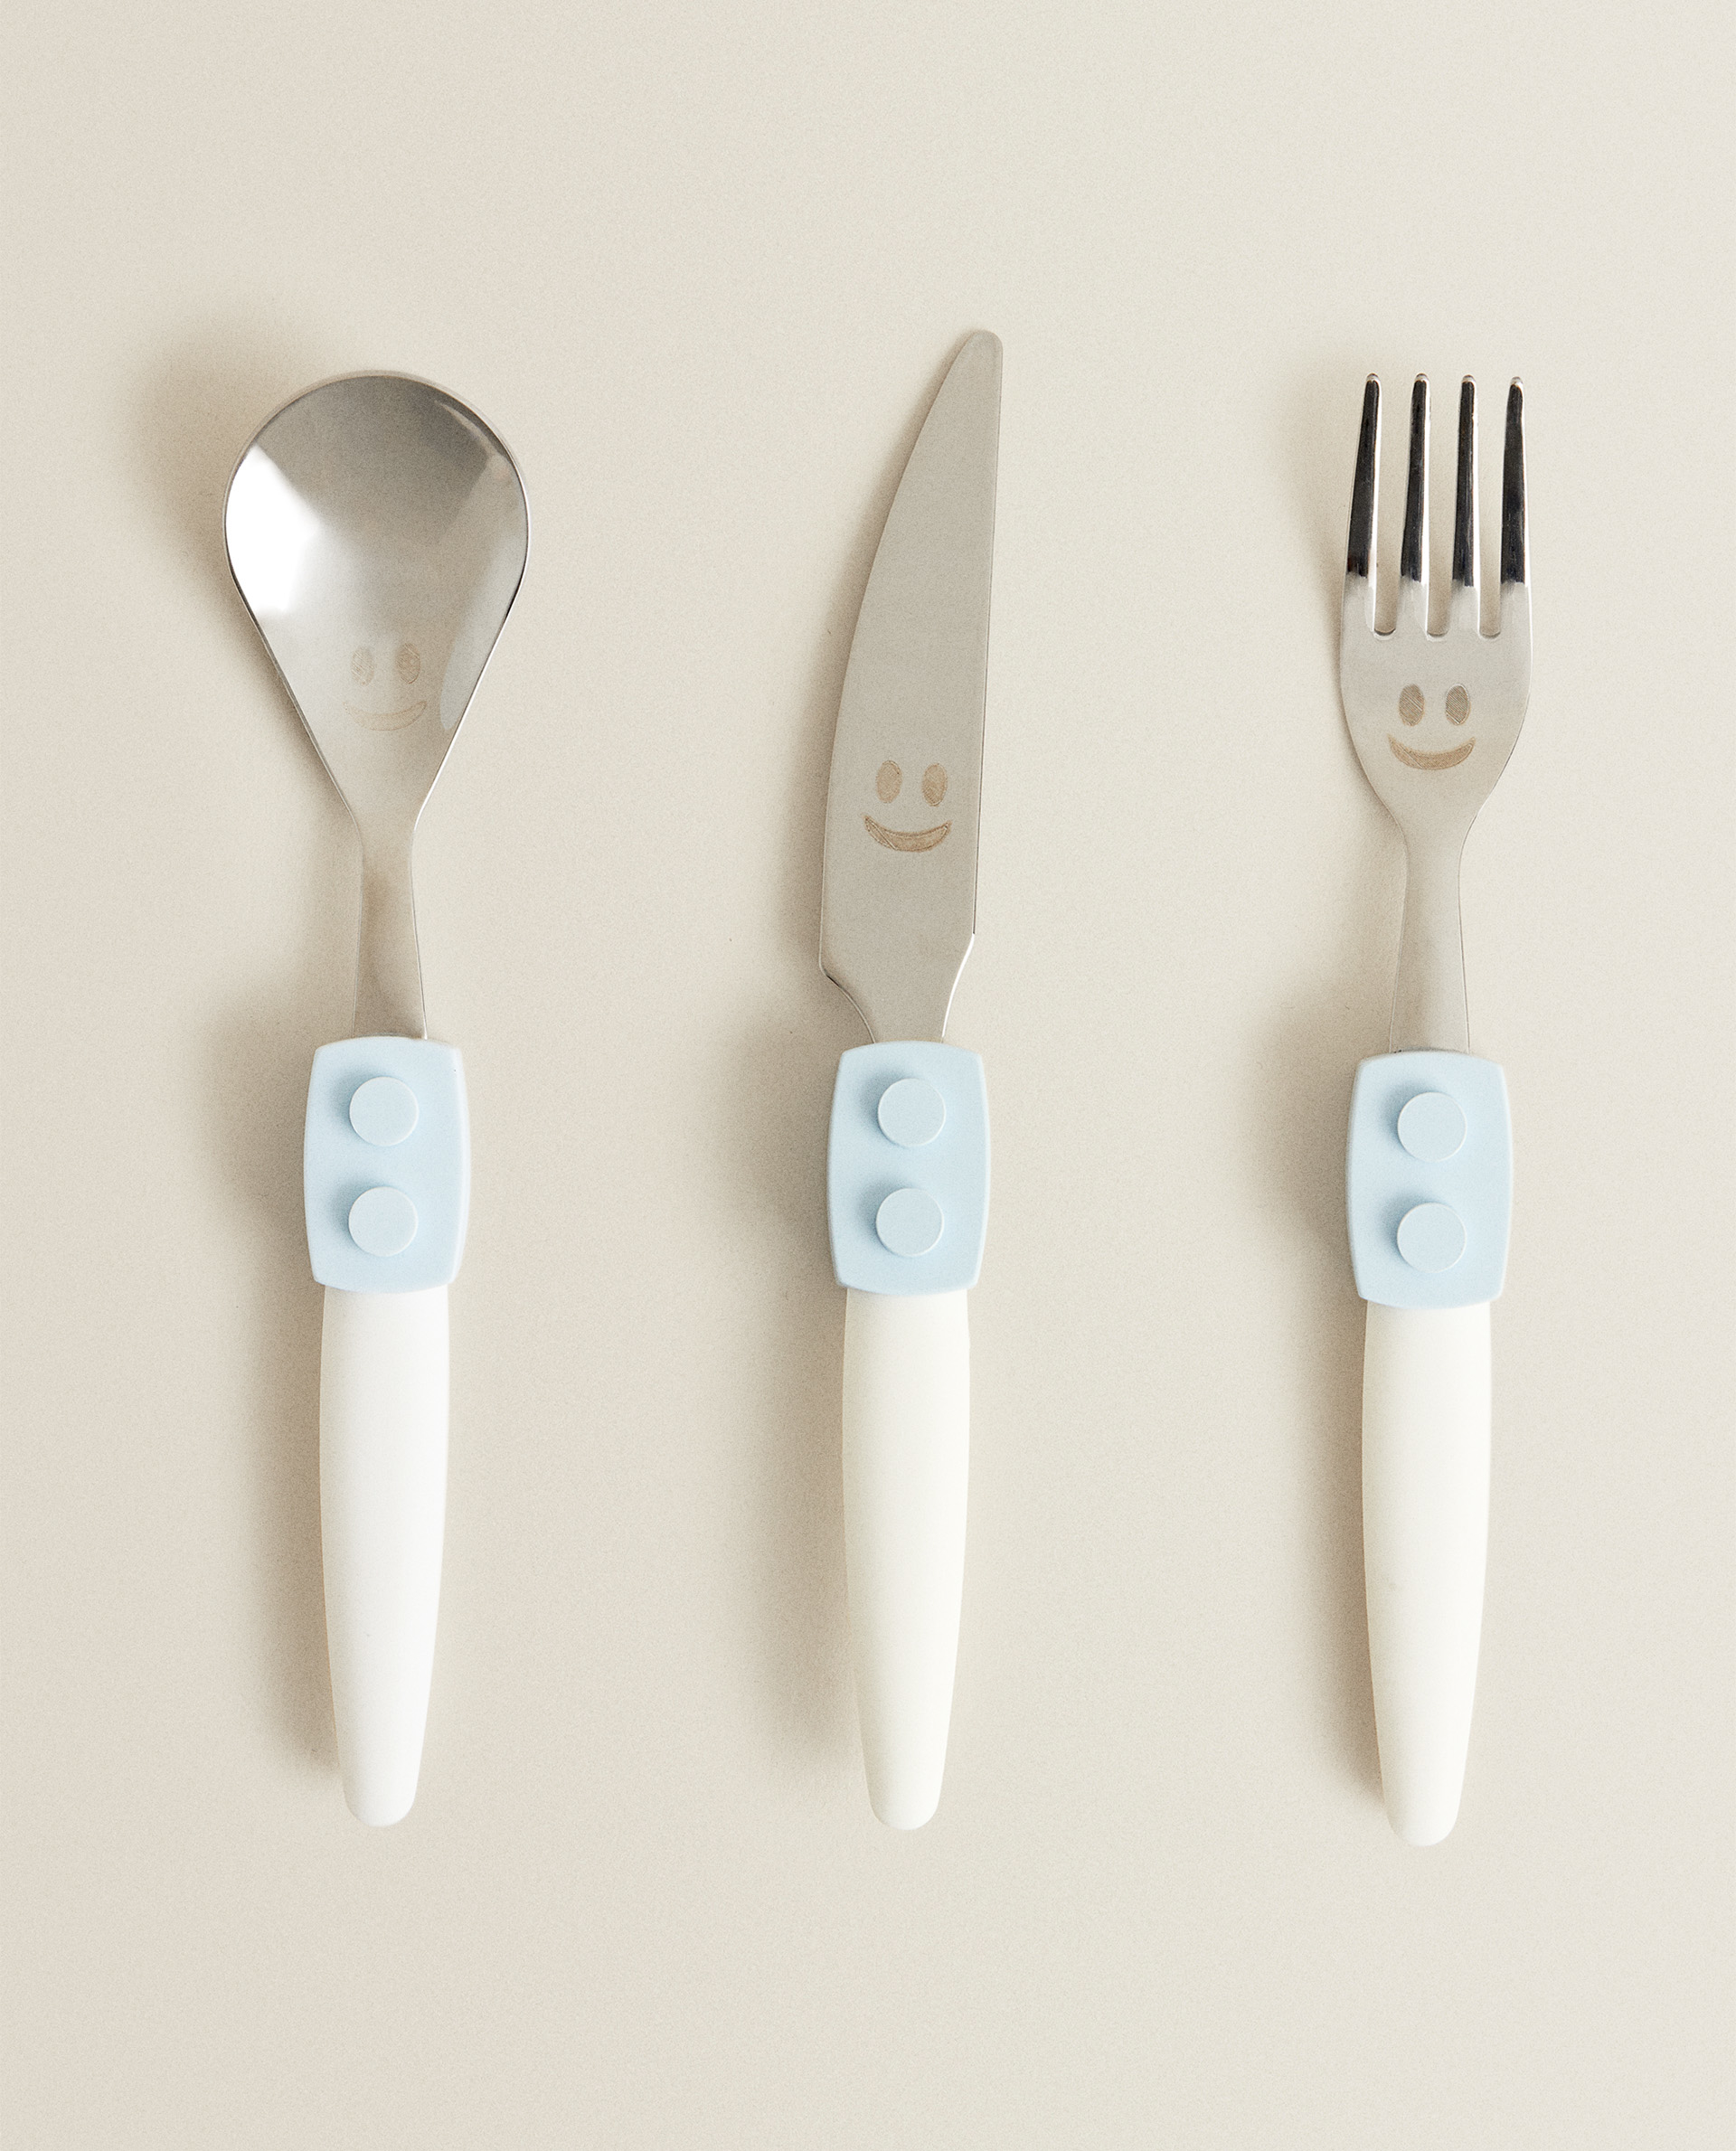 SMILEY FACE CUTLERY - KIDS - NEW IN 